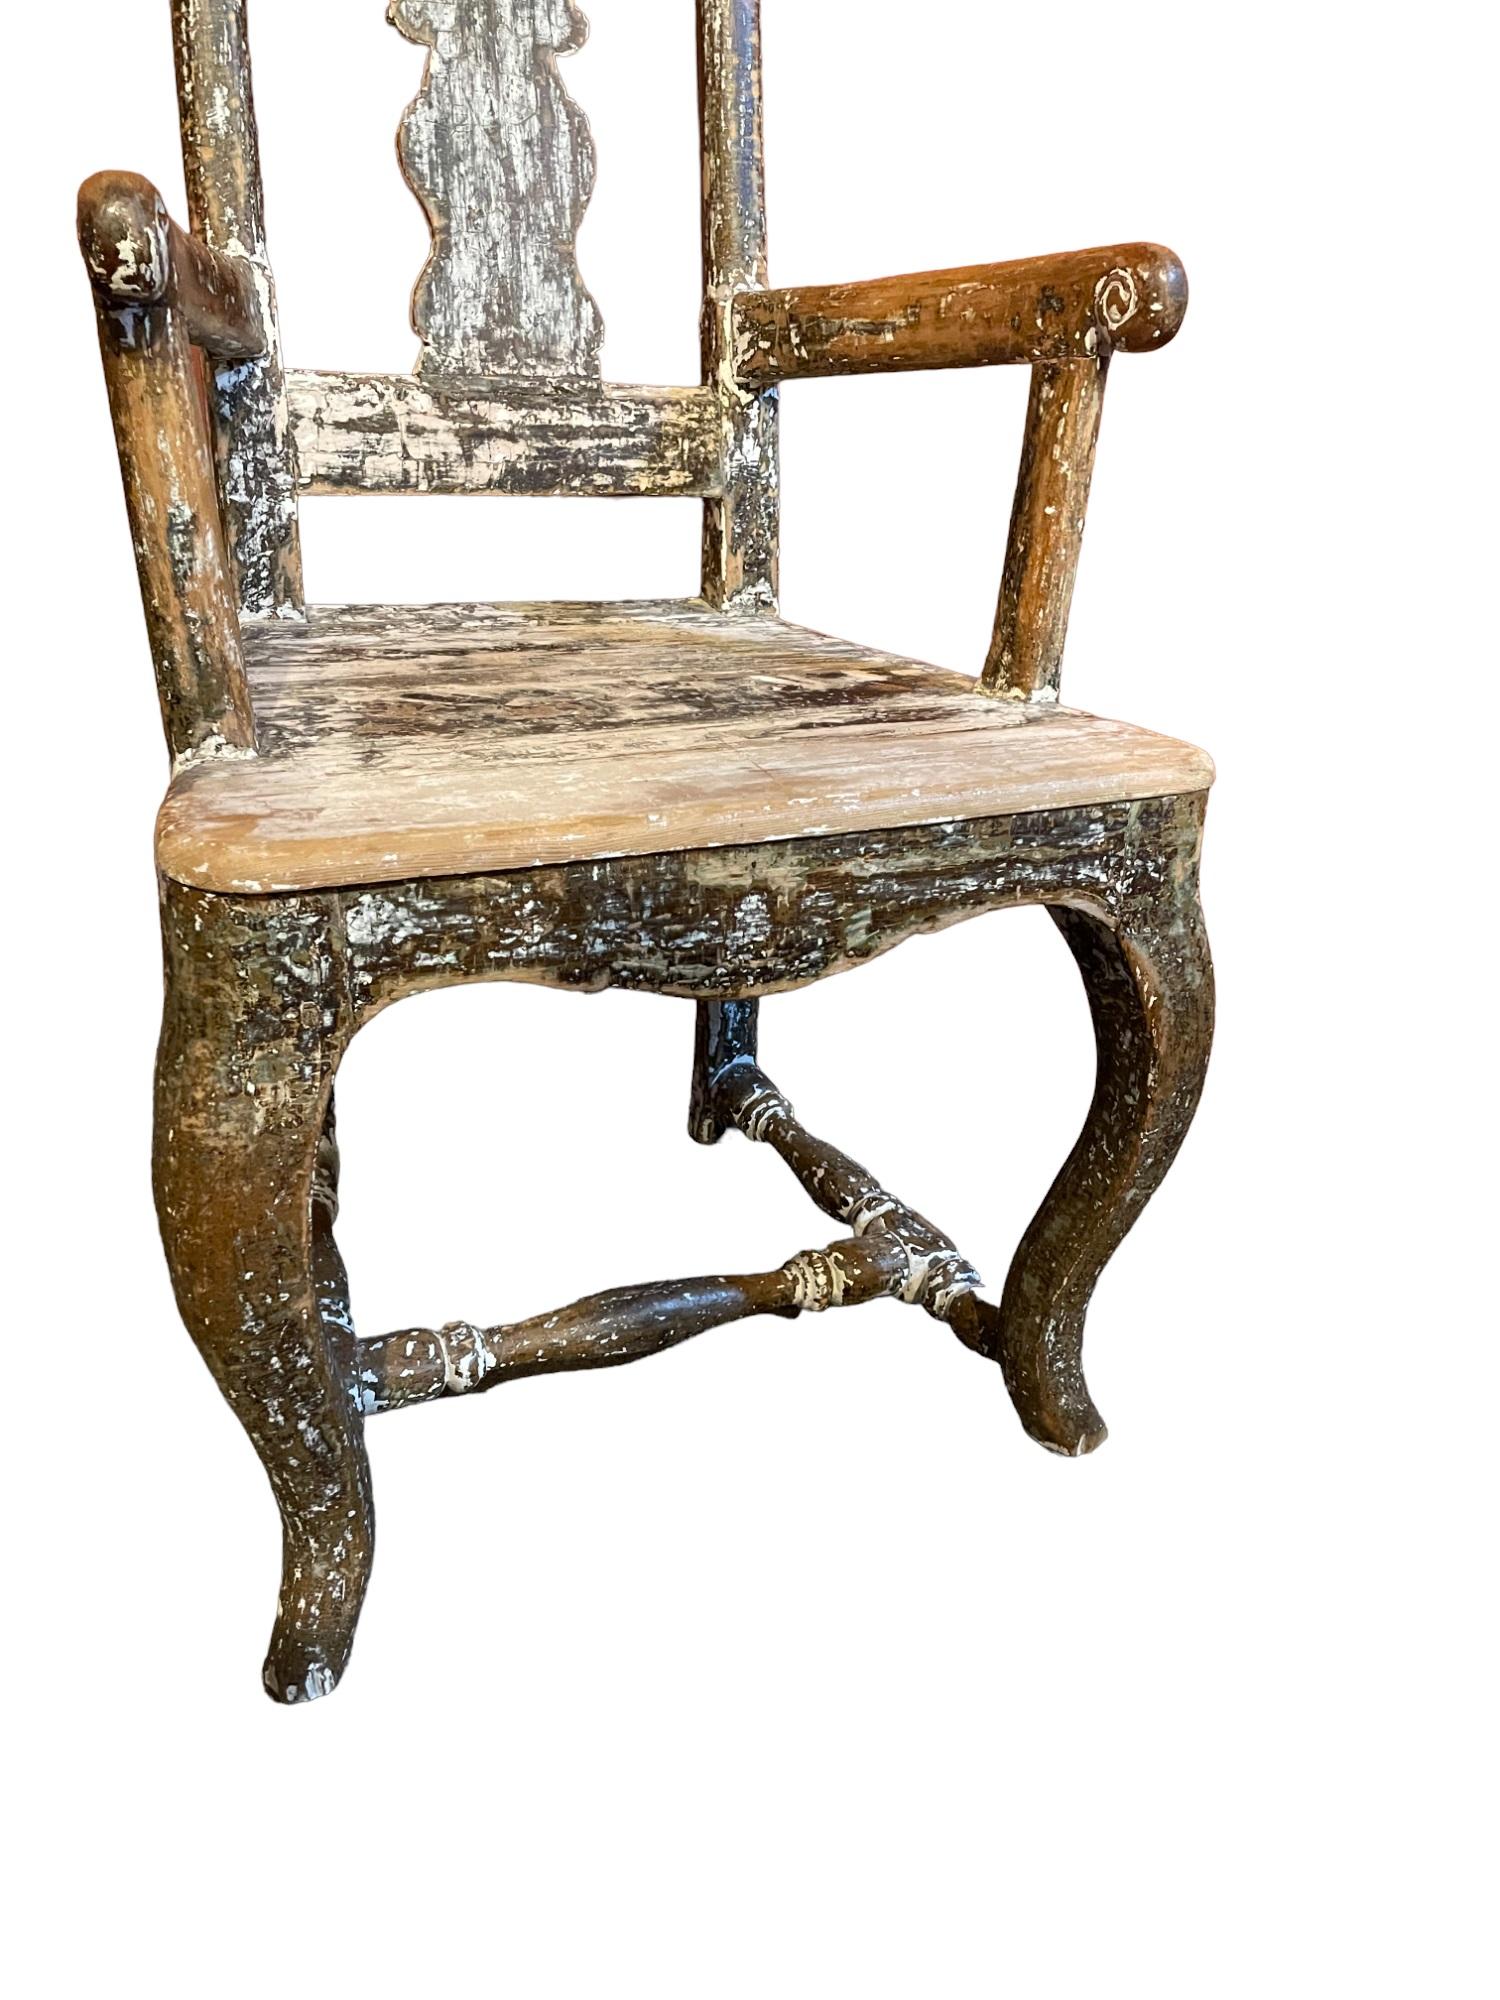 Swedish Rococo Period Armchair
Circa 1760 in original distressed paint
Ideal for a smaller desk chair or just ornamental

seat height : 18